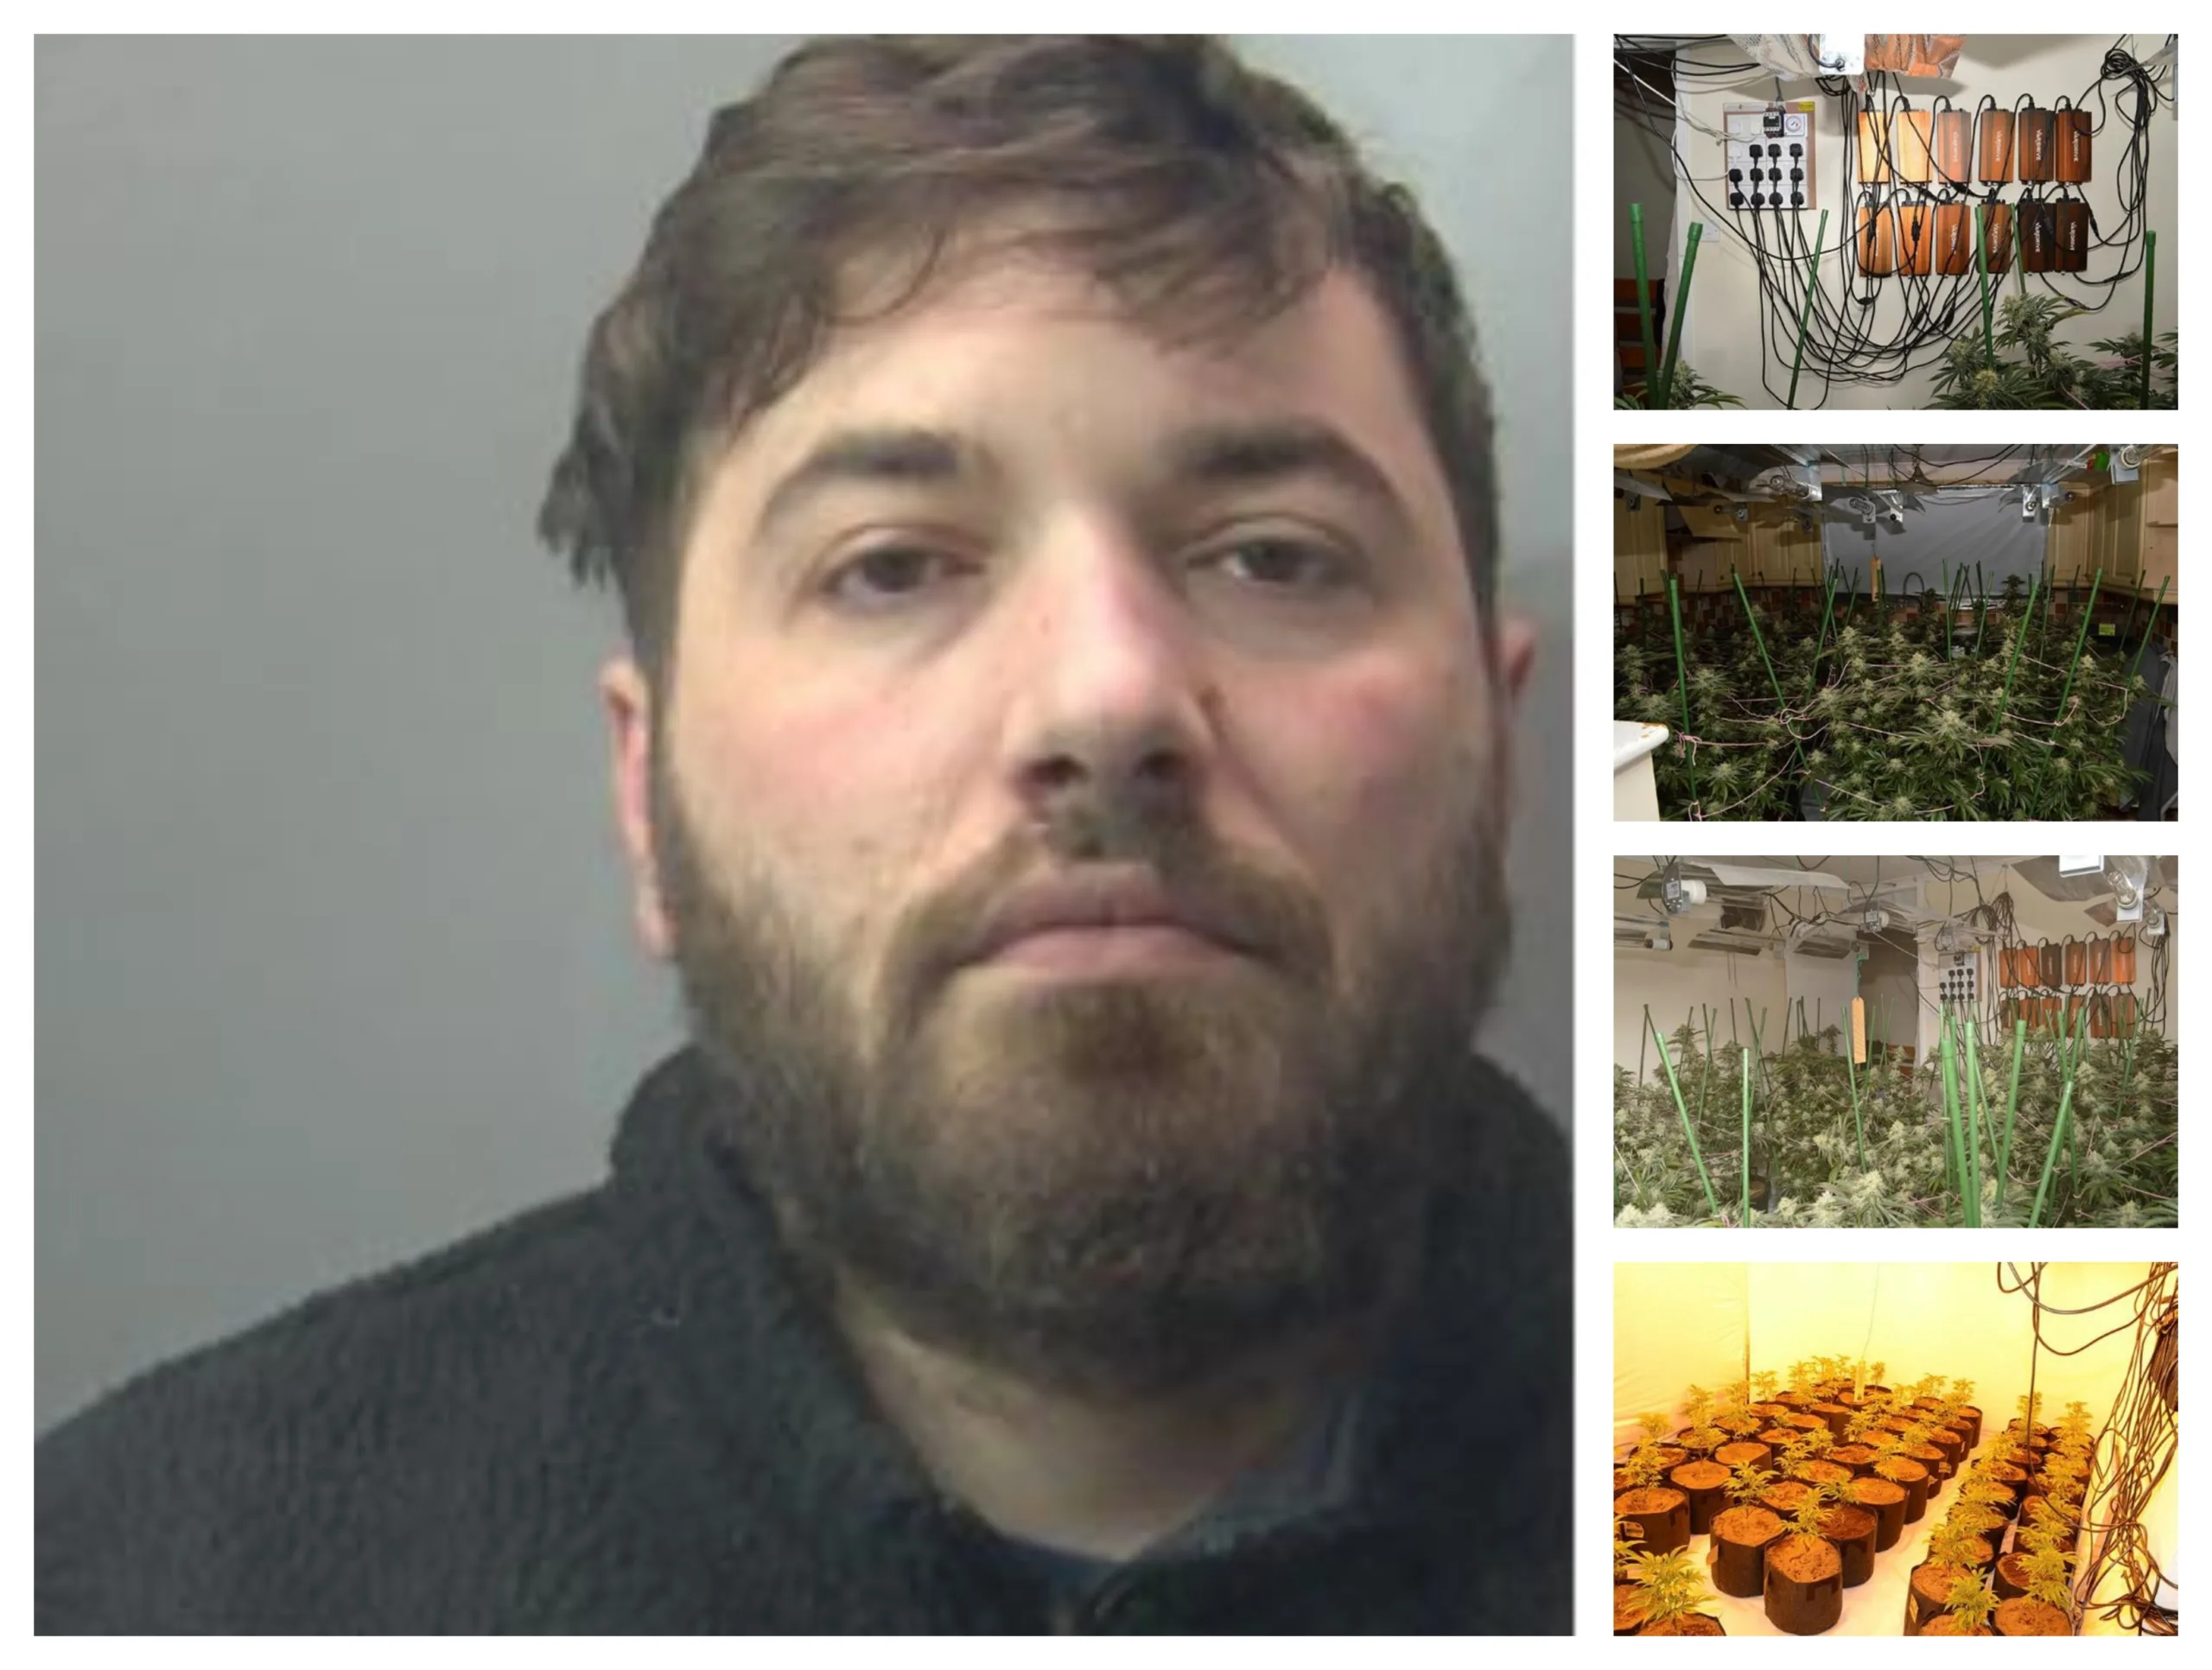 A review of the phone of Genc Giergie found photos of cannabis plants, including “selfies” with the yields and photographs of documents relating to properties in Bretton and Yaxley.